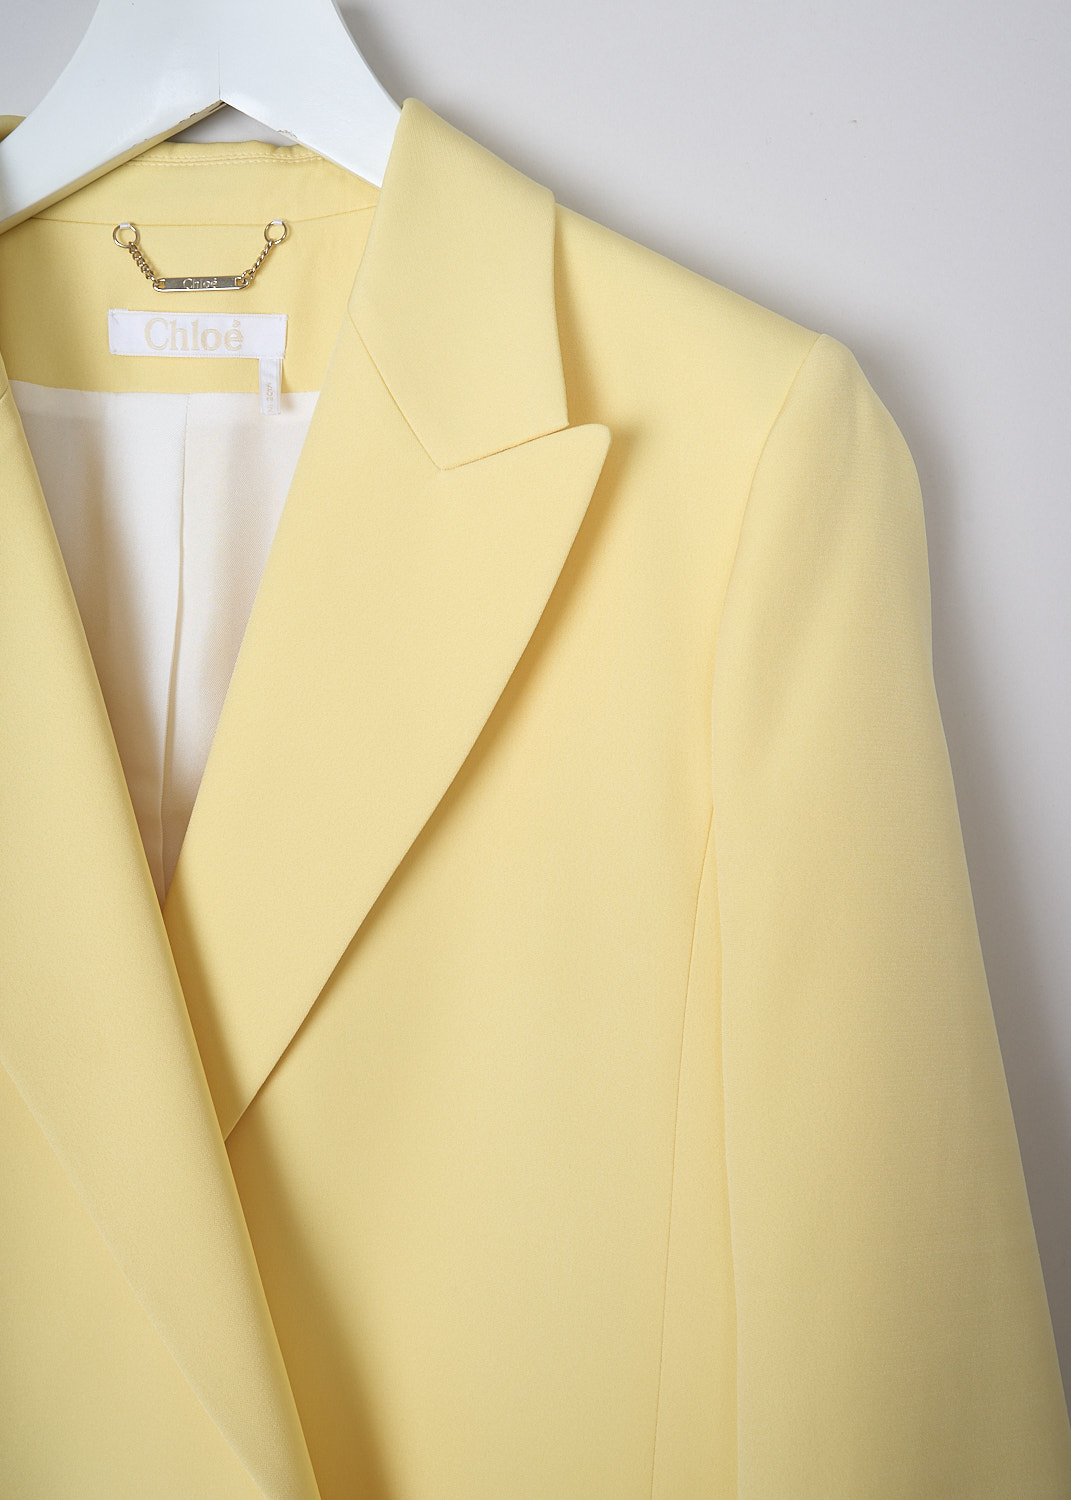 CHLOÉ, OPEN JACKET IN RADIANT YELLOW, CHC22UVE06015757_RADIANT_YELLOW, Yellow, Detail, This Radiant Yellow jacket has a peaked lapel with an open front. On the front, the jacket has two flap welt pockets. In the back, the jacket has a centre vent. The jacket is fully lined and has an oversized silhouette. 
